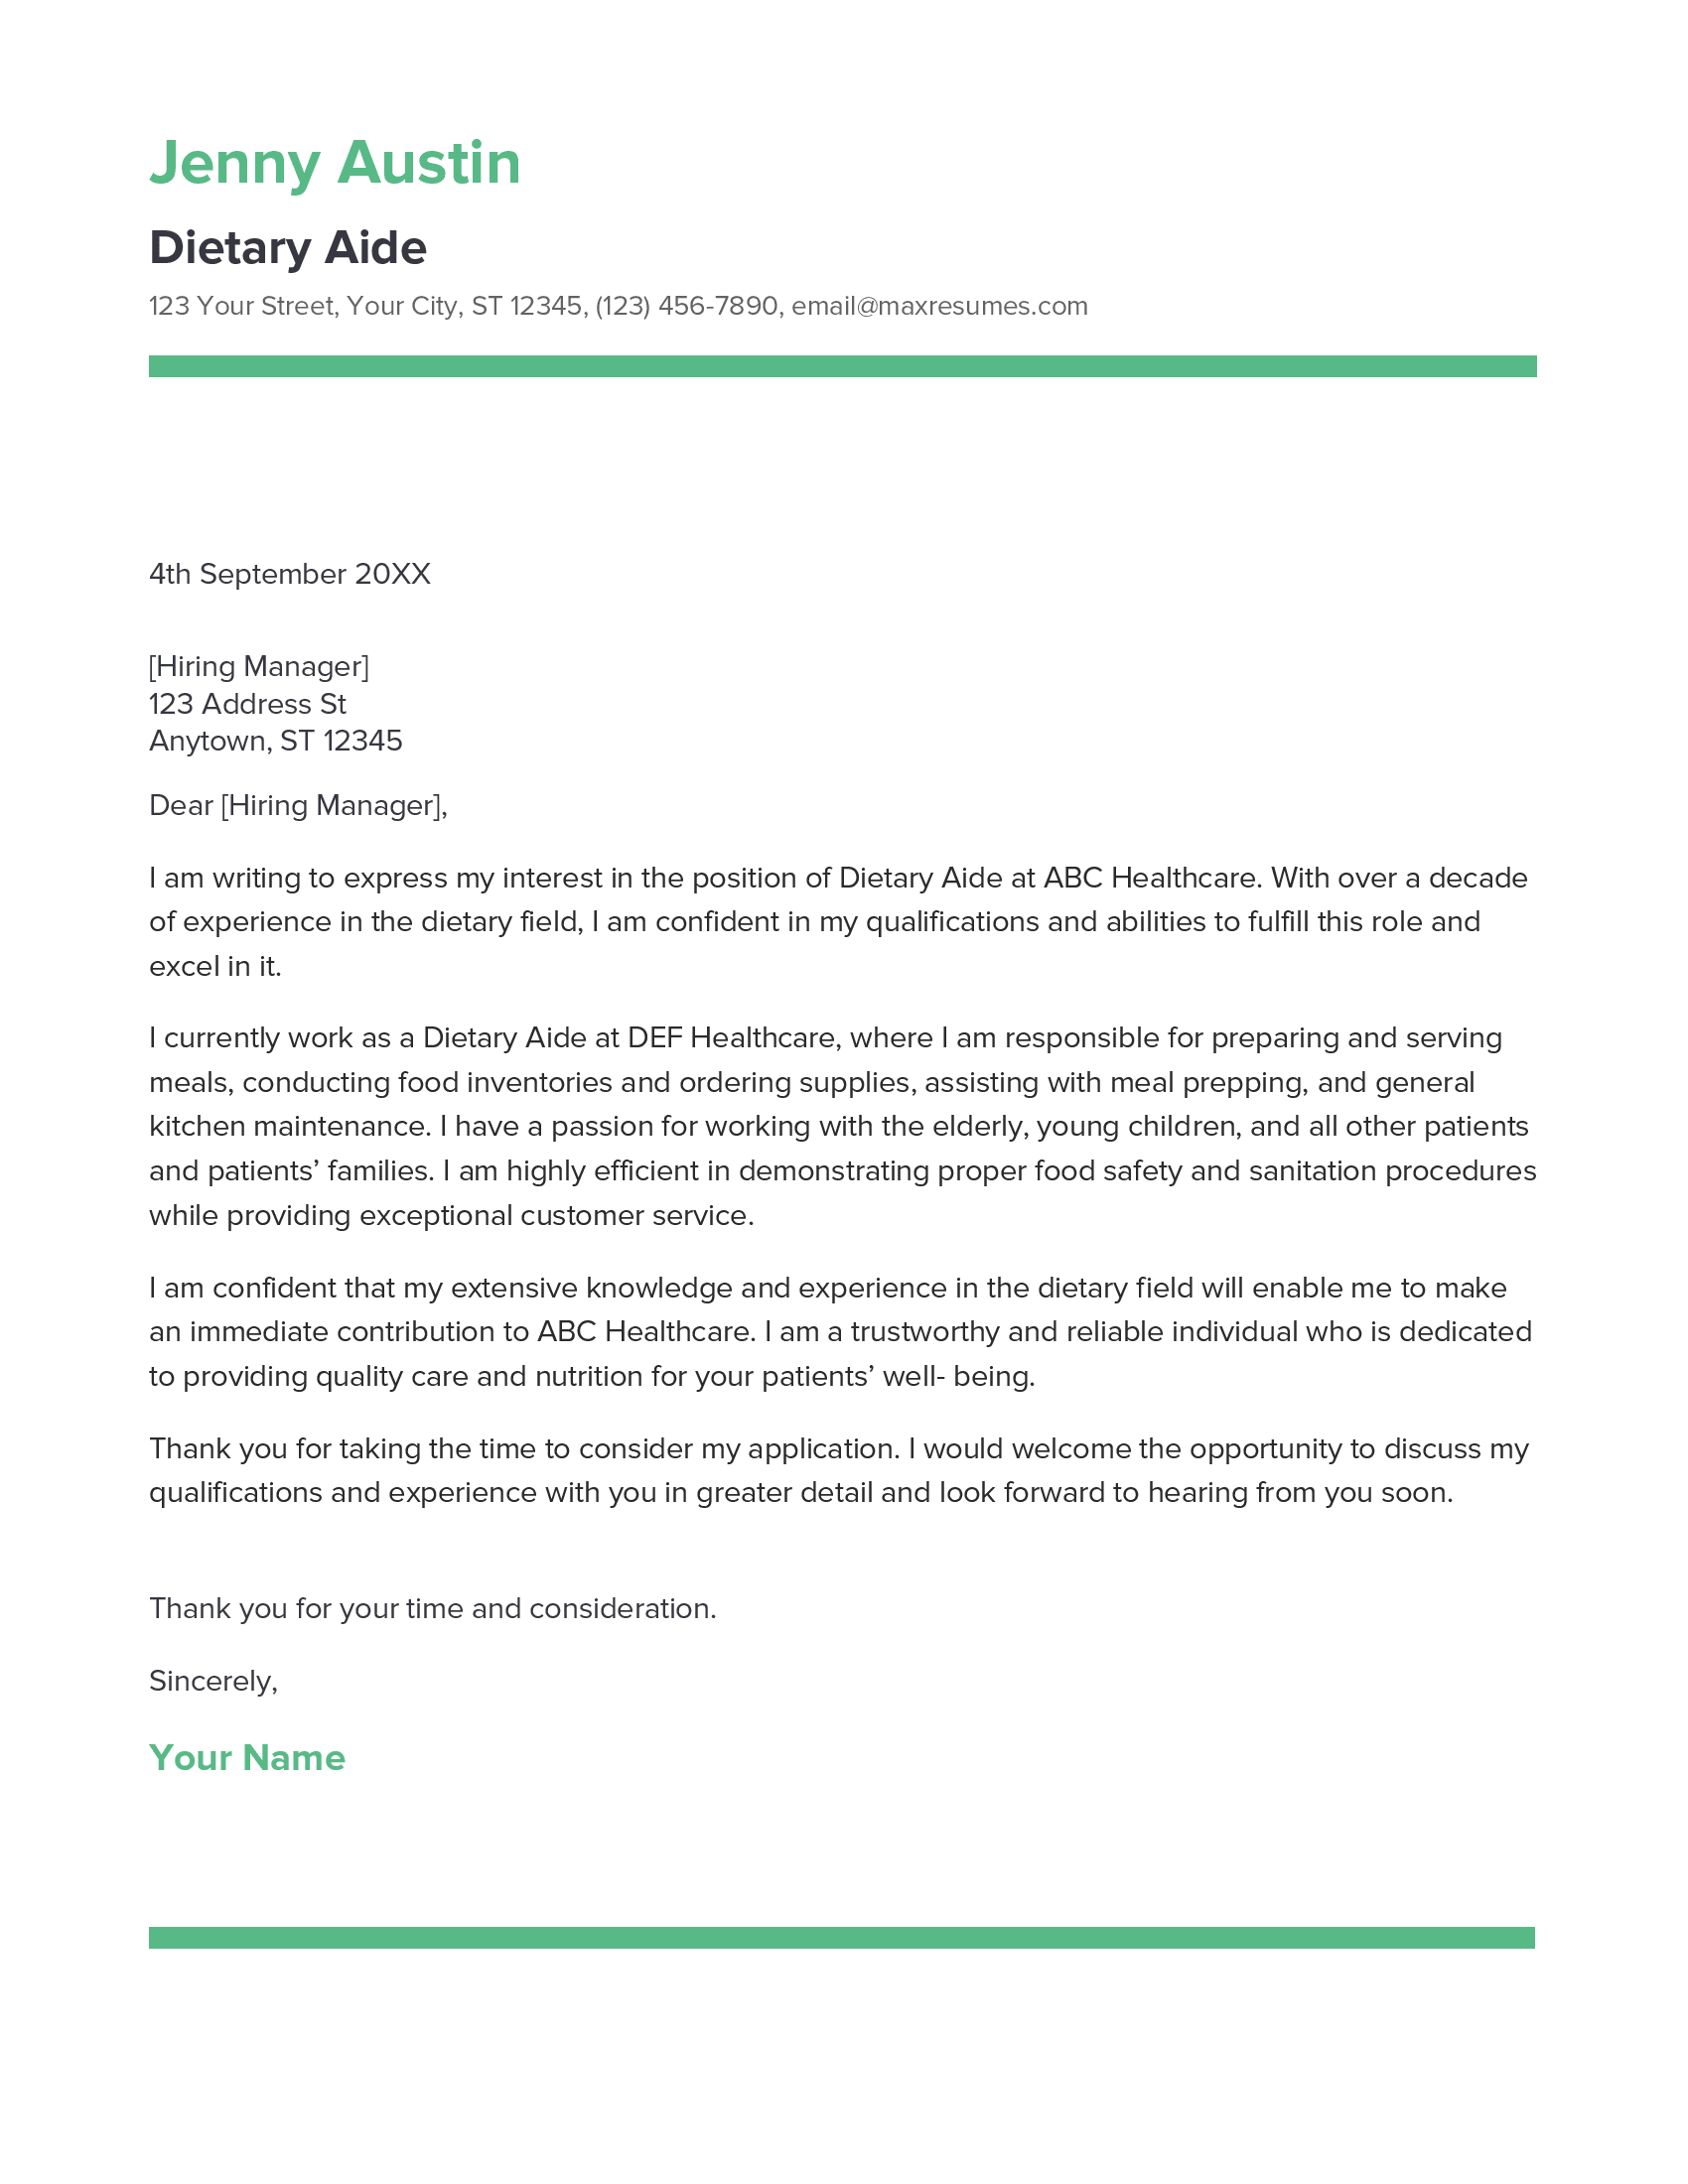 Dietary Aide Cover Letter Example